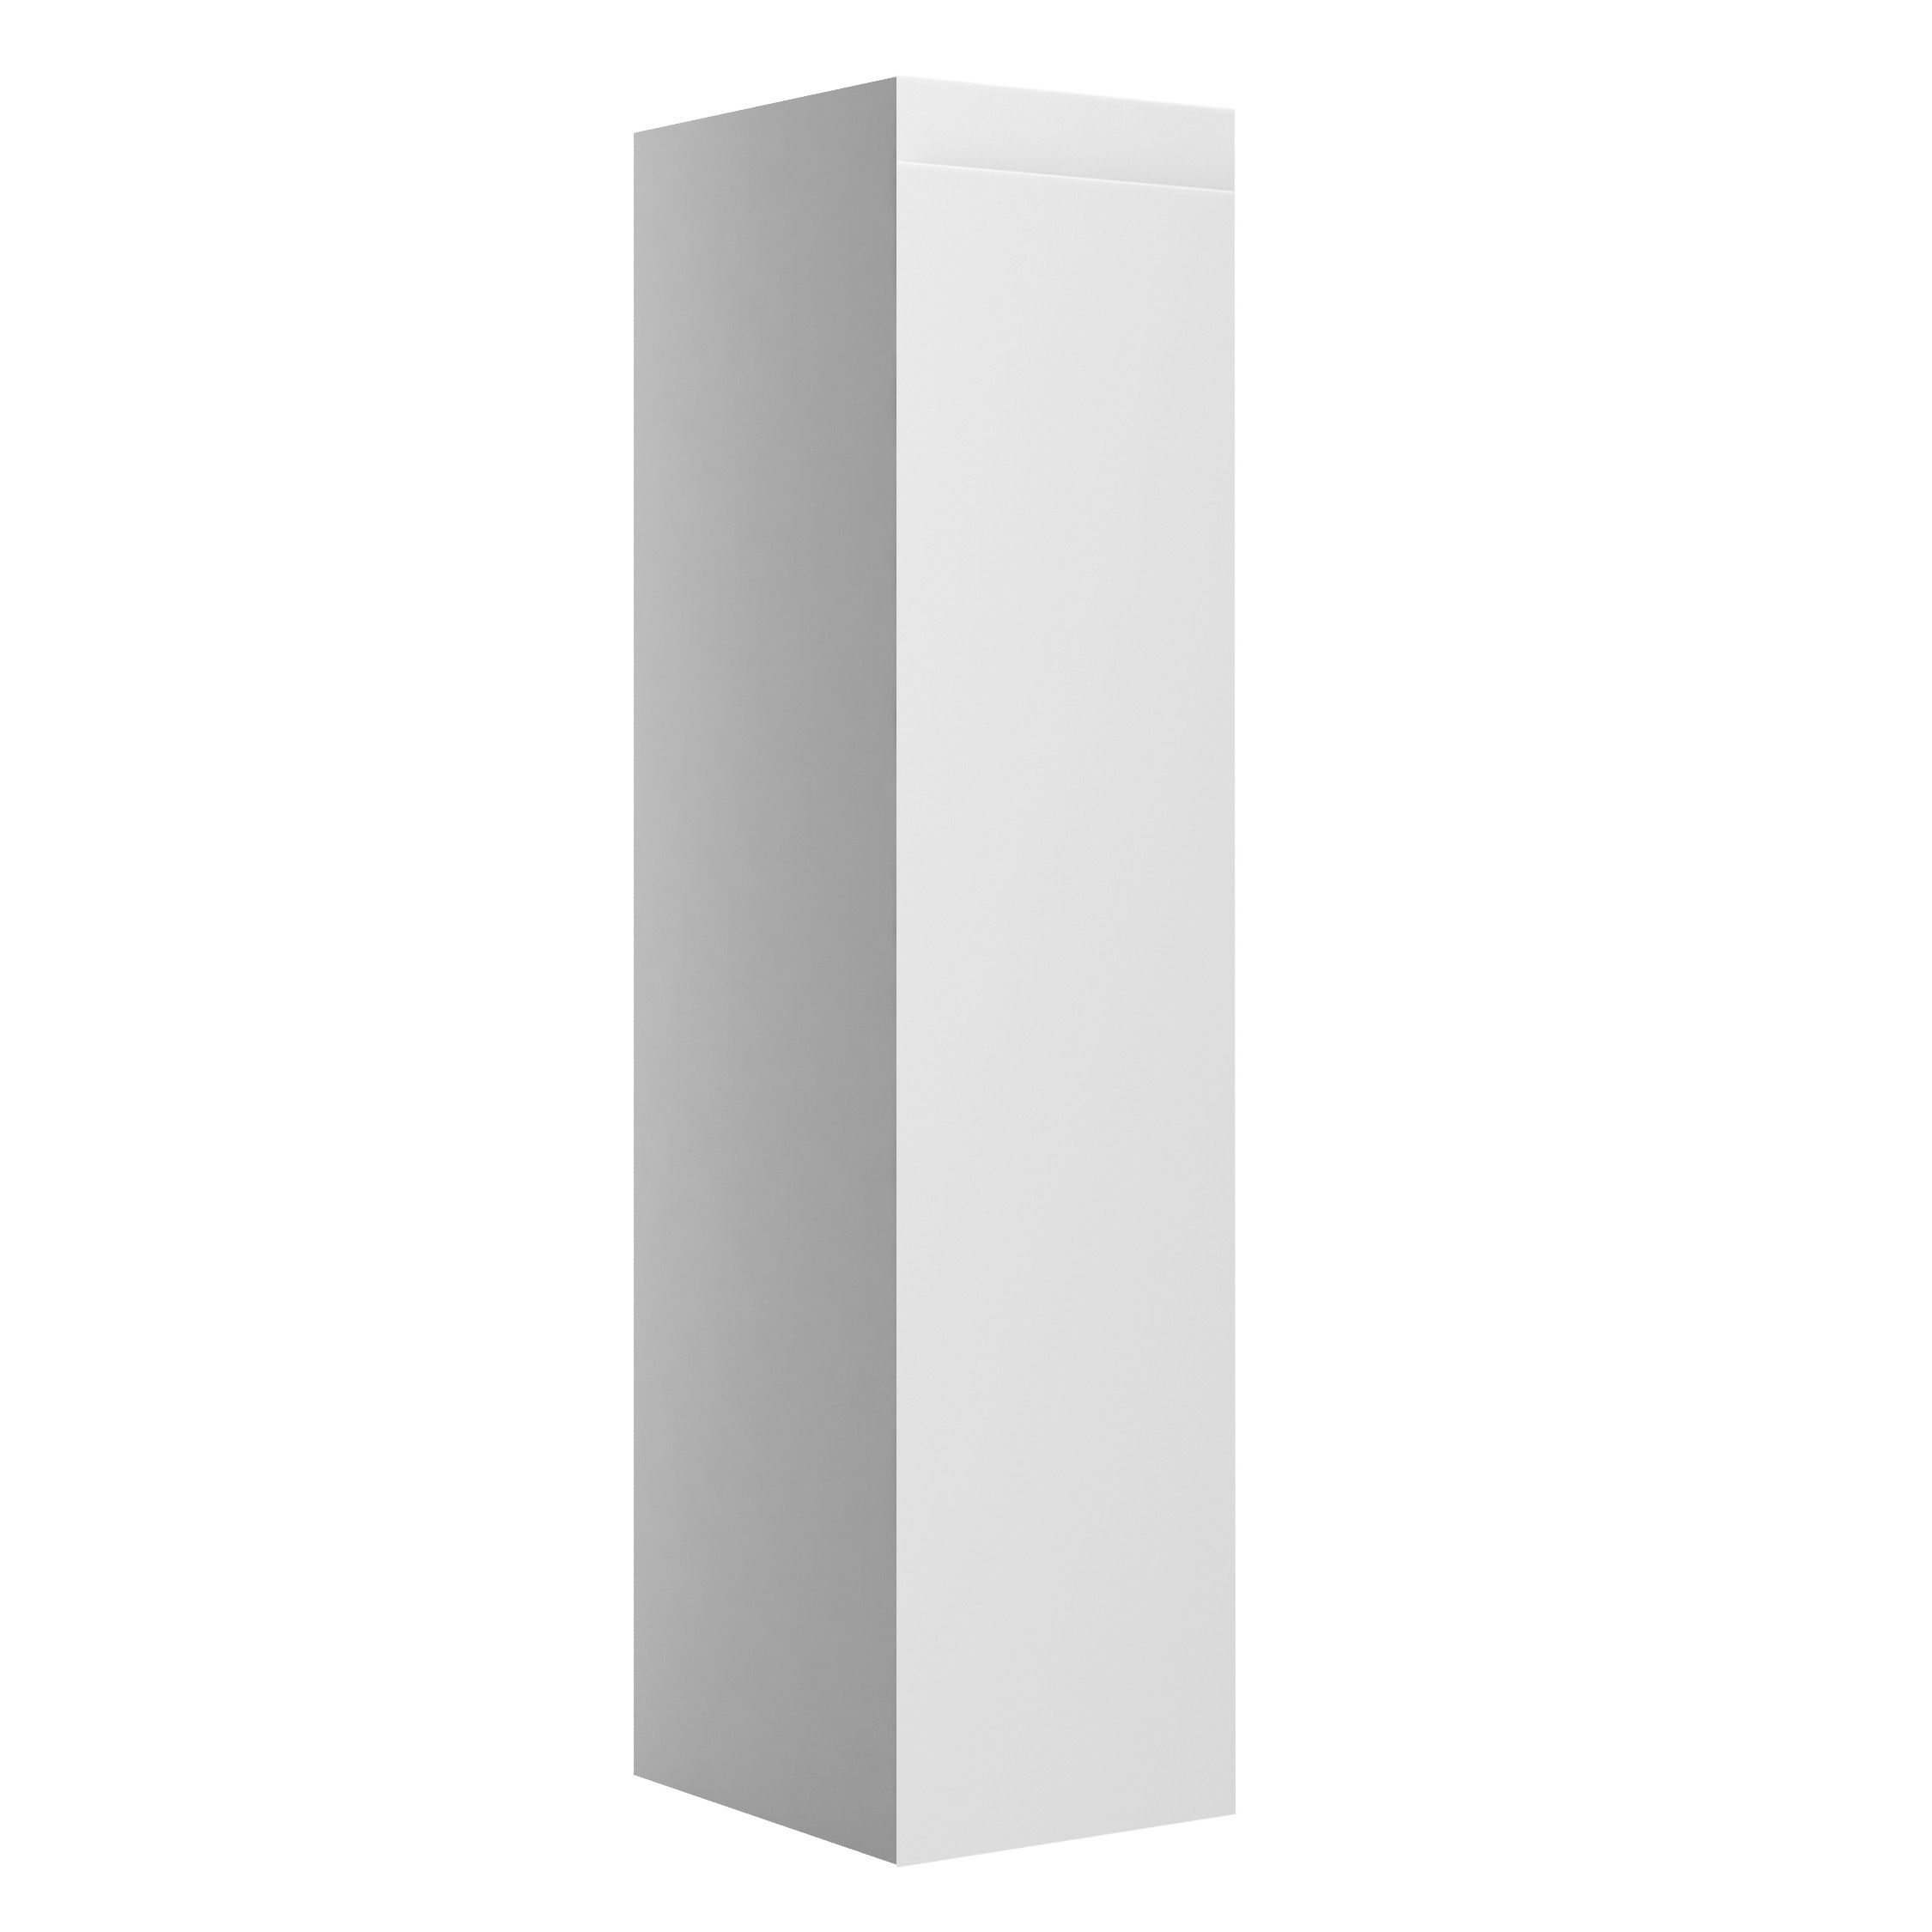 Cooke & Lewis Marletti Gloss White Base Cabinet (W)160mm (H)852mm